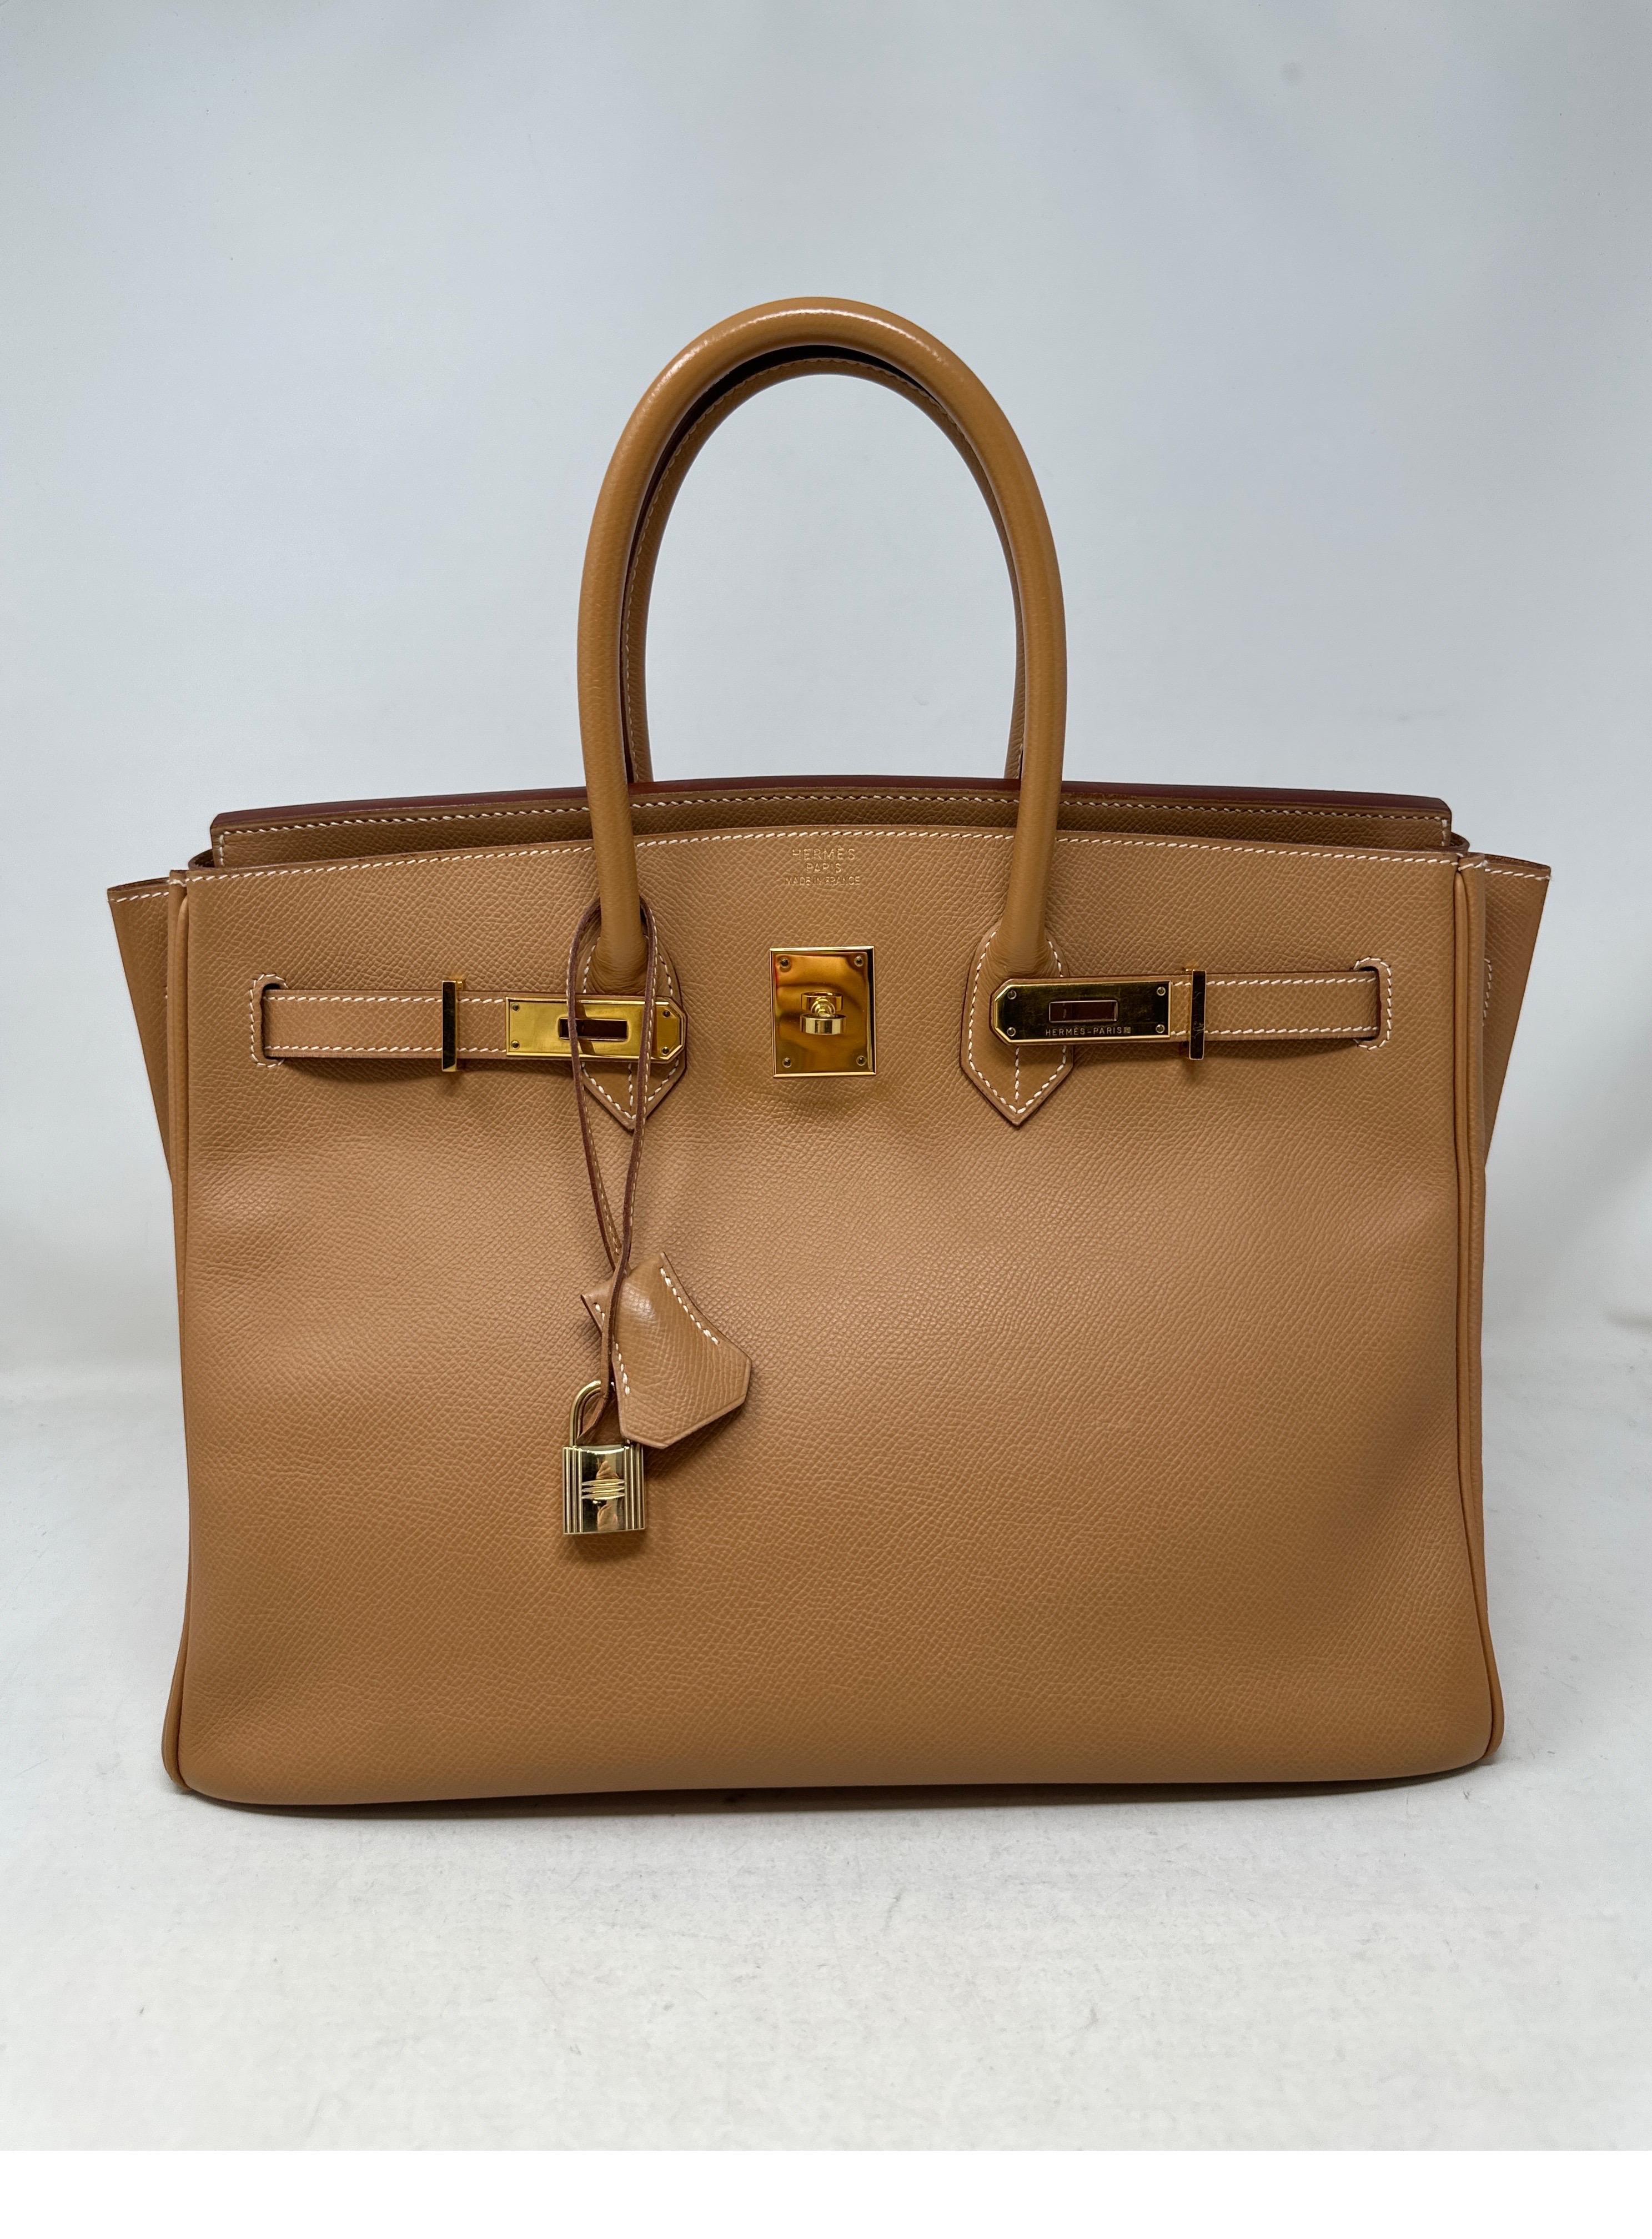 Hermes Natural Tan Birkin 35 Bag. Light tan color with gold hardware. Excellent condition. Great nuetral color. Hard to find. Light epsom leather. Interior clean. Includes clochette, lock, keys, and dust bag. Guaranteed authentic. 